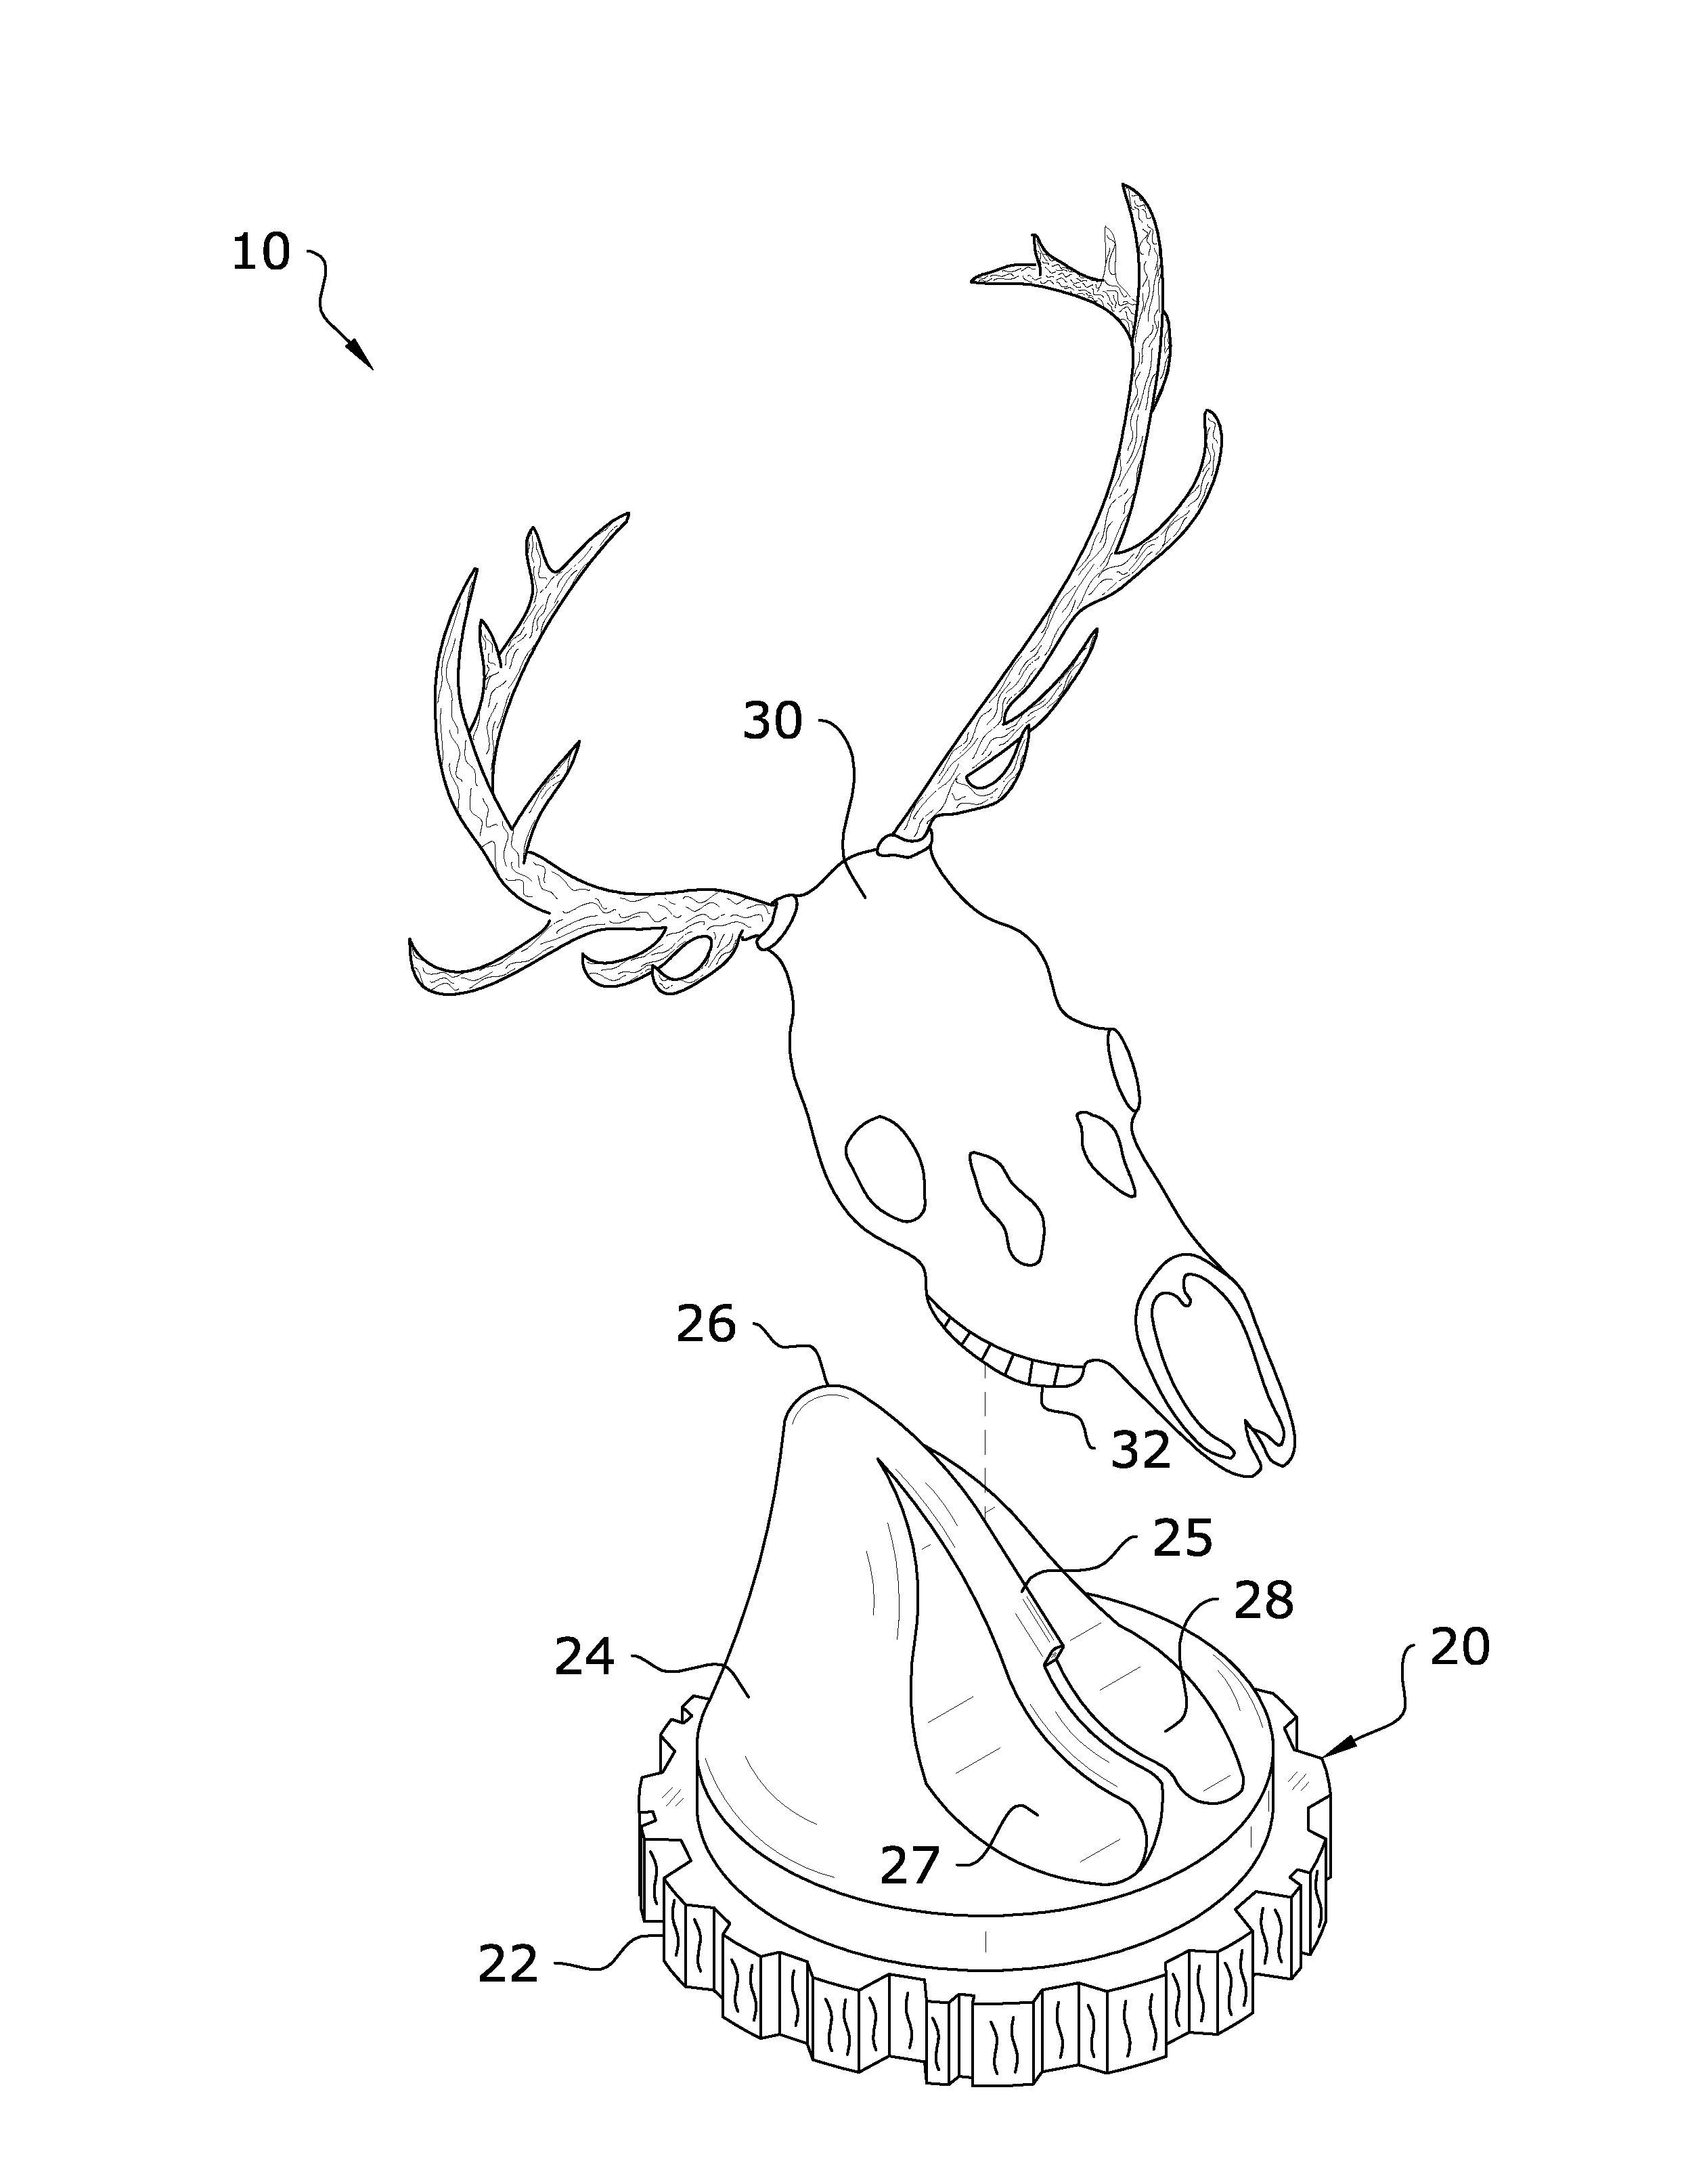 Skull mounting and casting system